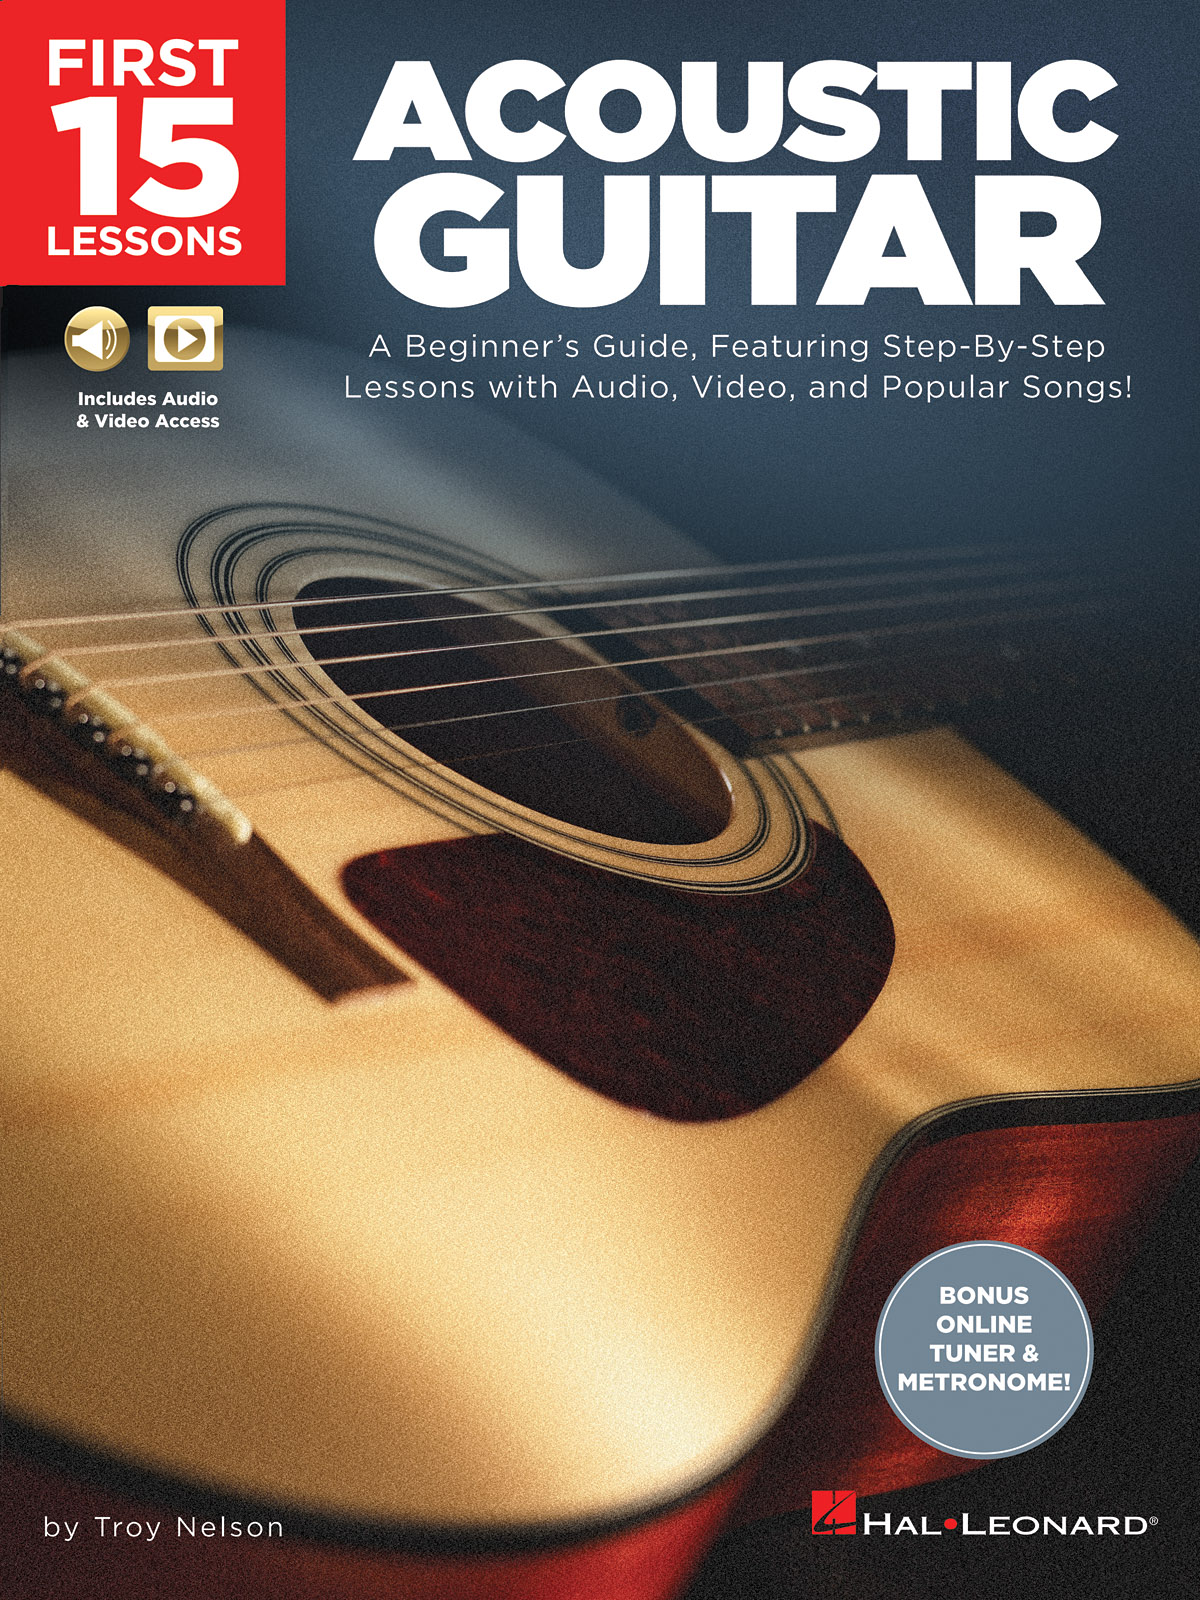 First 15 Lessons - Acoustic Guitar - A Beginner's Guide, Featuring Step-By-Step Lessons with Audio, Video, and Popular Songs! - noty na kytaru